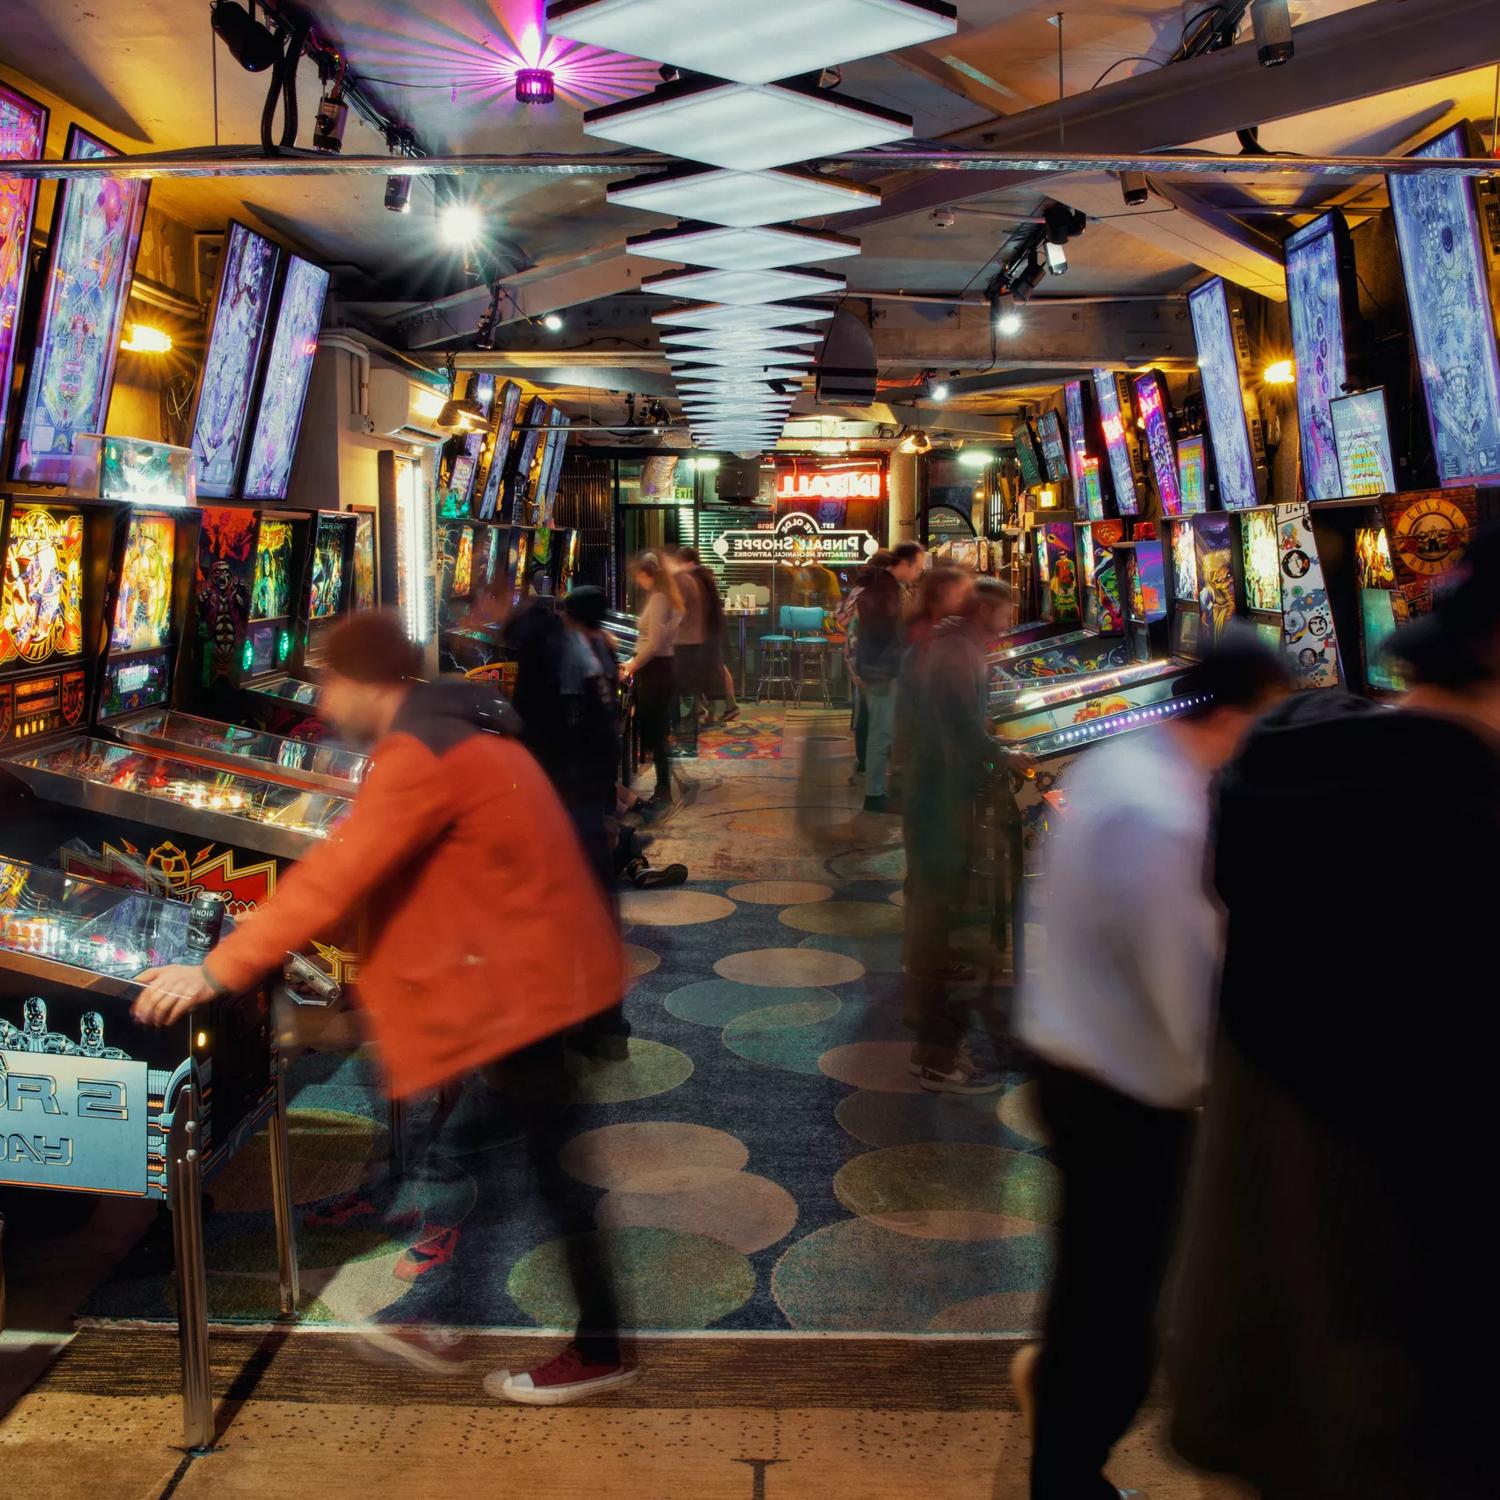 Looking straight down the middle of the arcade with pinball machines on either side. Multiple neon lights and blinking lights from the machines. There are several people playing arcade games, some of whom are blurred in mid movement.